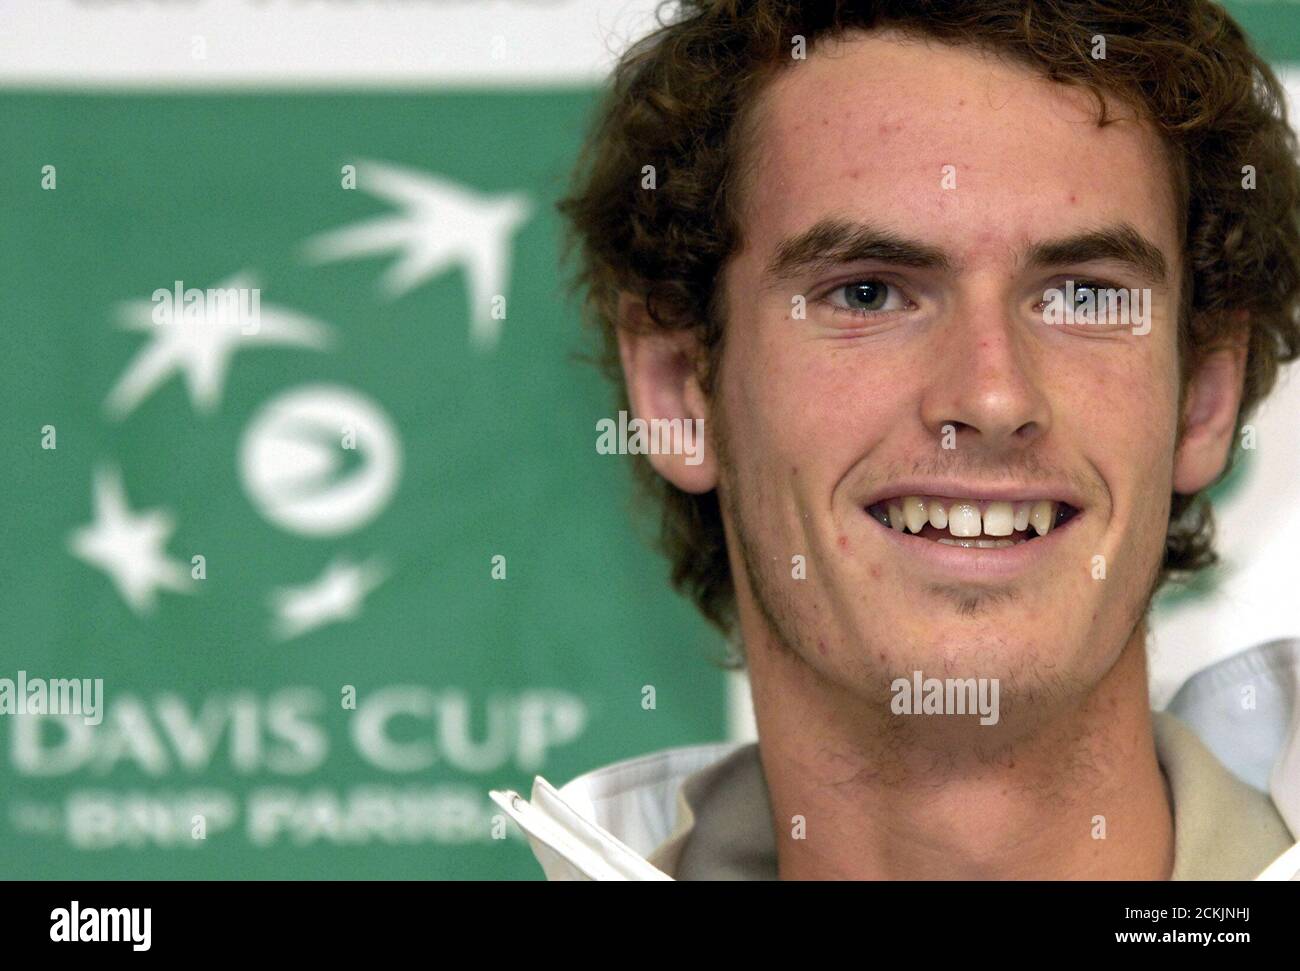 British tennis player Andy Murray smiles during a news conference of the British Davis Cup team at Palexpo in Geneva.  British tennis player Andy Murray smiles during a news conference of the British Davis Cup team at Palexpo in Geneva, Switzerland, September 21, 2005. Great Britain will play against Switzerland in the Davis Cup World Group Play-offs set to be played between 23-25 September 2005 in Geneva. REUTERS/Denis Balibouse Stock Photo